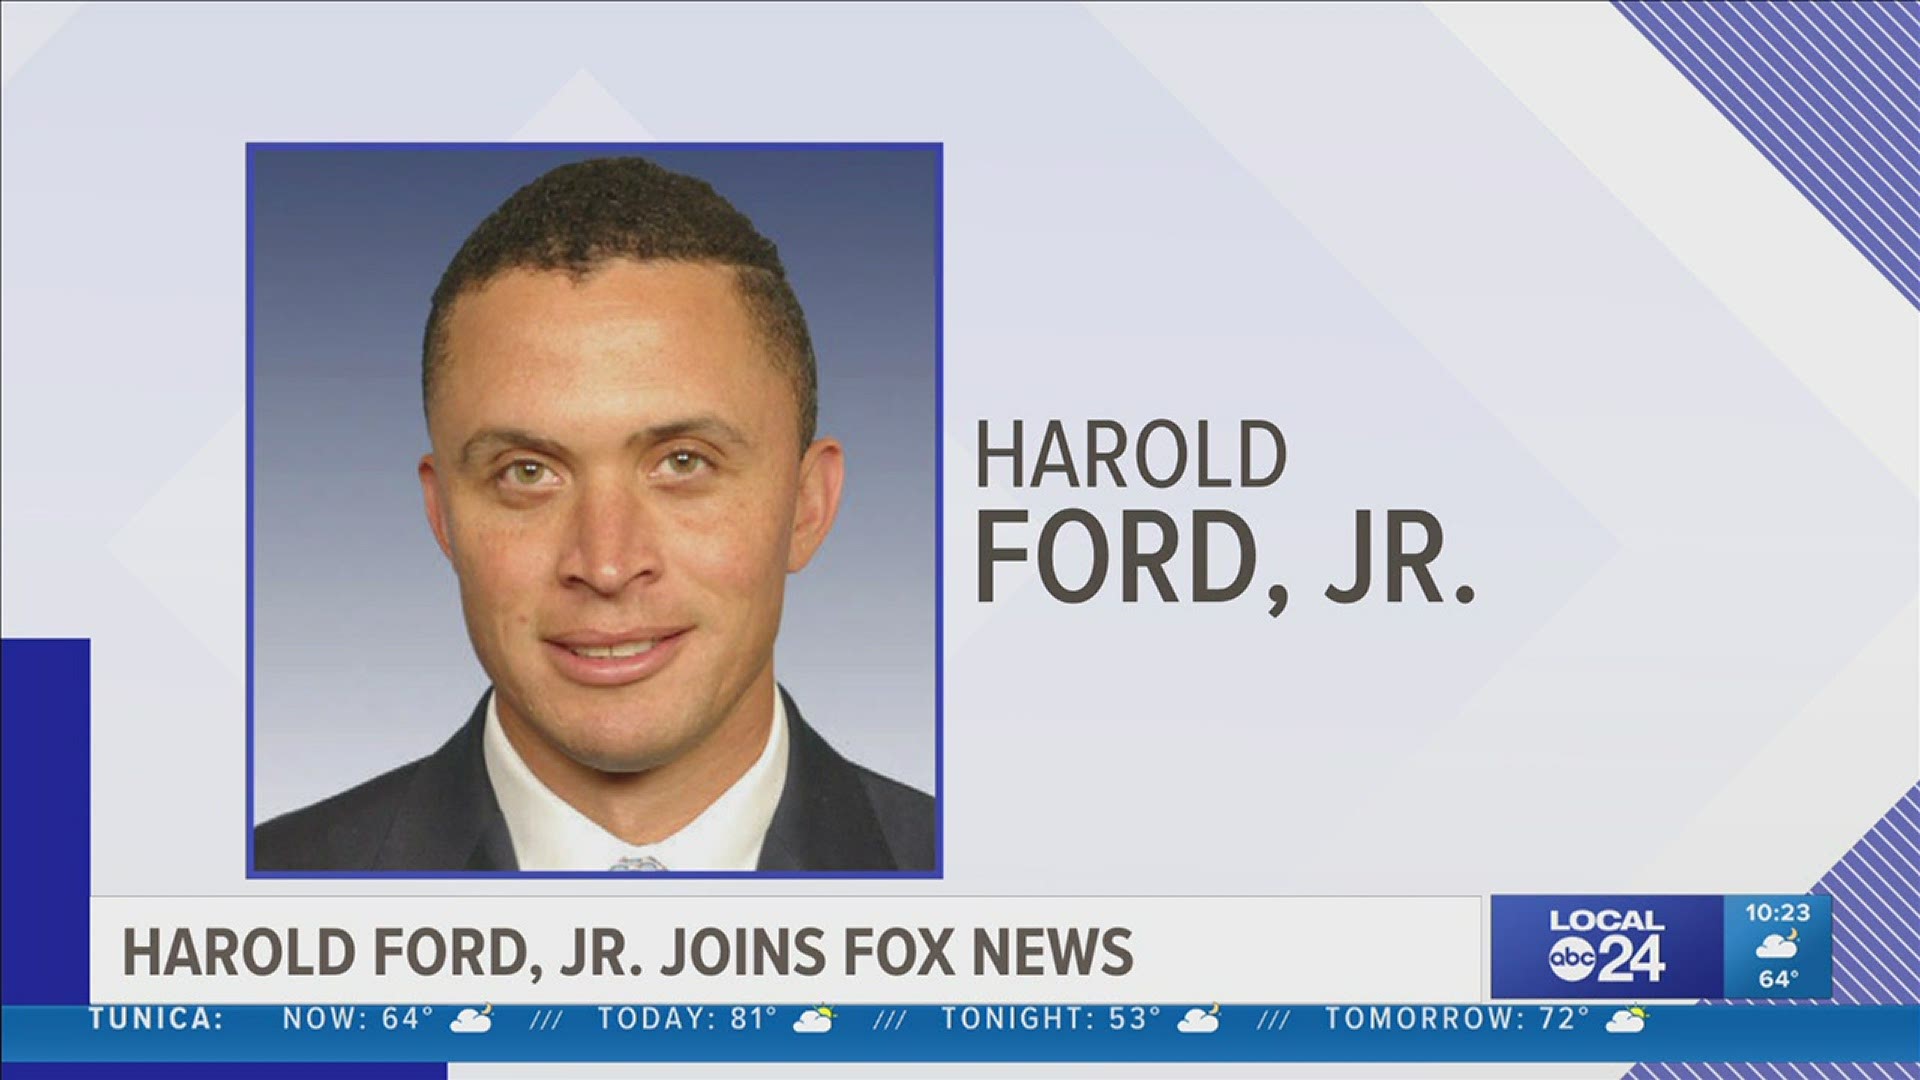 Former Democratic Congressman Harold Ford, Jr. just inked a deal as a contributor for Fox News.